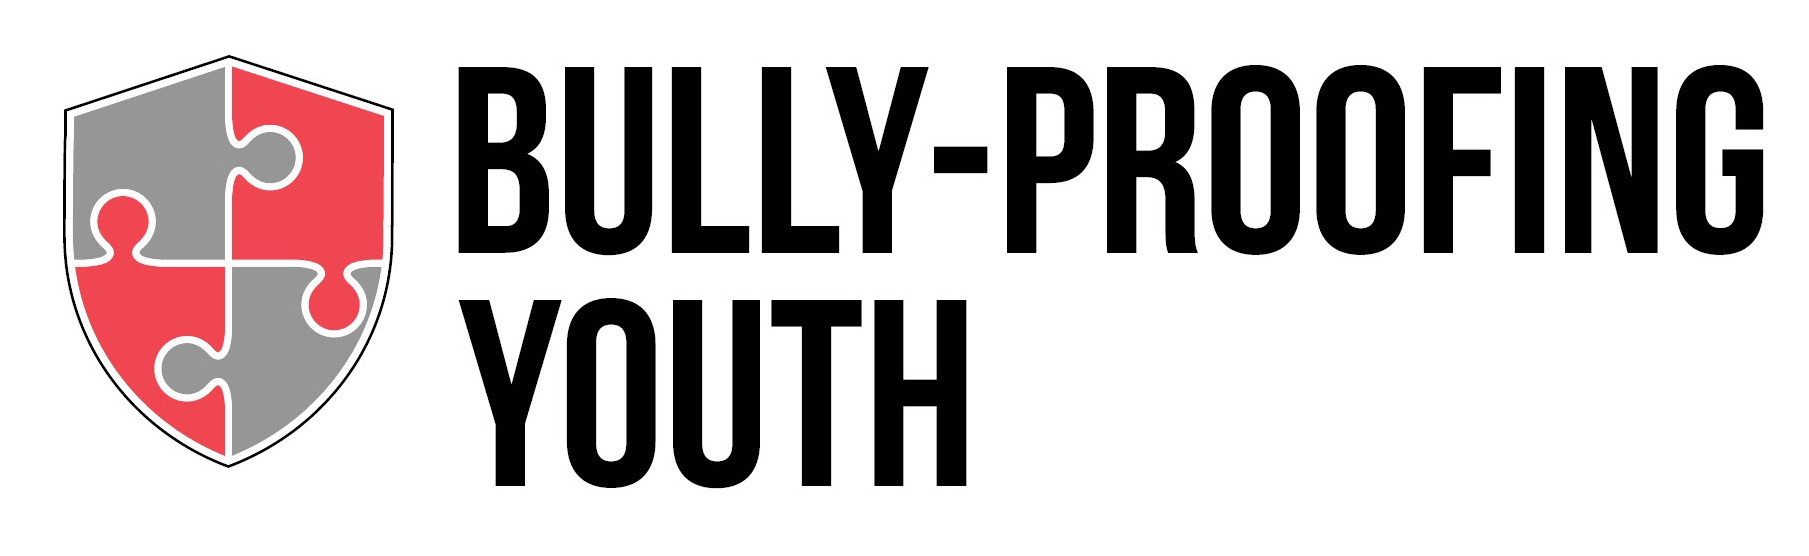 BULLY-PROOFING YOUTH